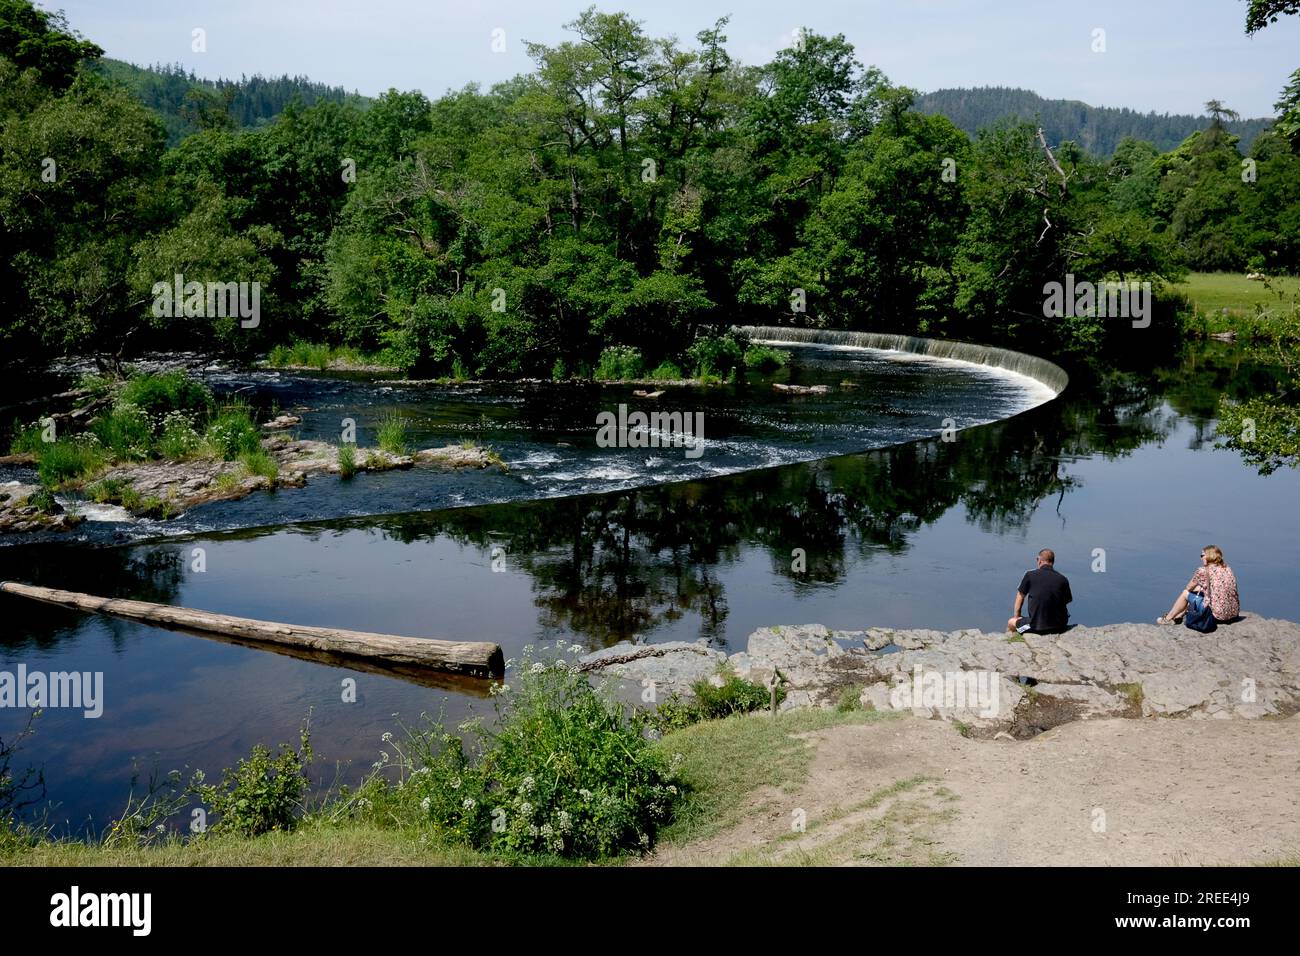 Horseshoe Falls weir on the River Dee at Llangollen, Wales, Uk Stock Photo